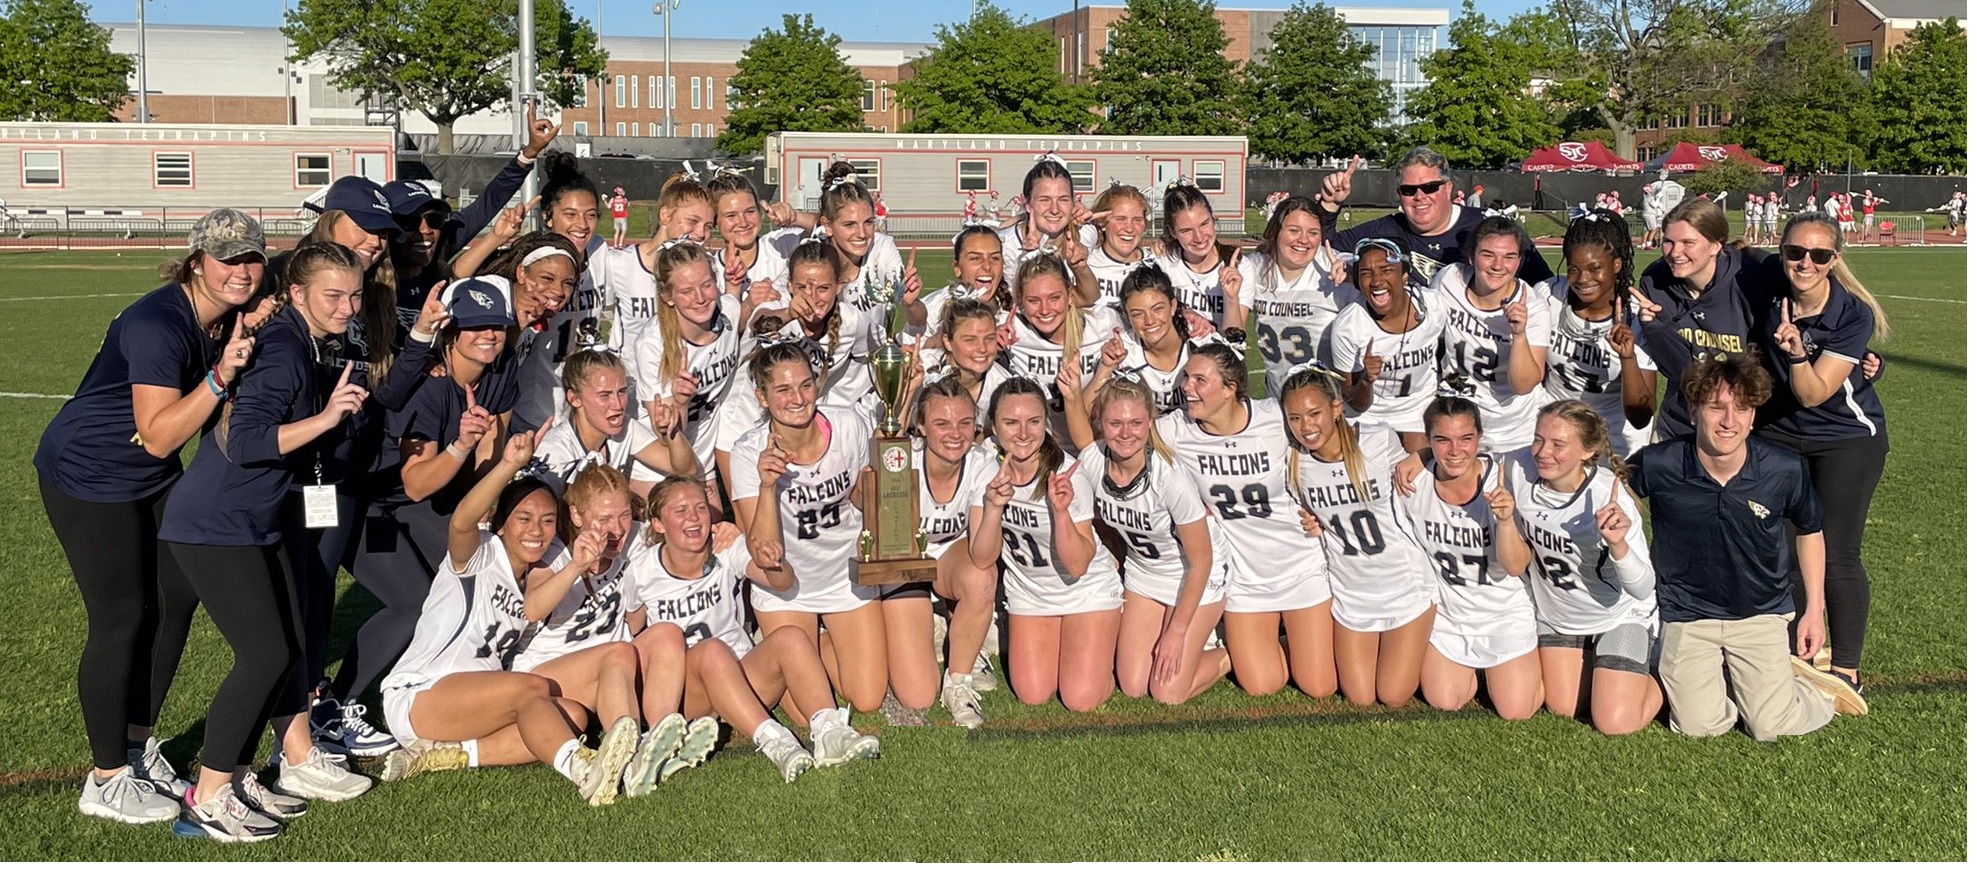 Sisters Hannah and Madeleine Rudolph guide Good Counsel to WCAC lacrosse title